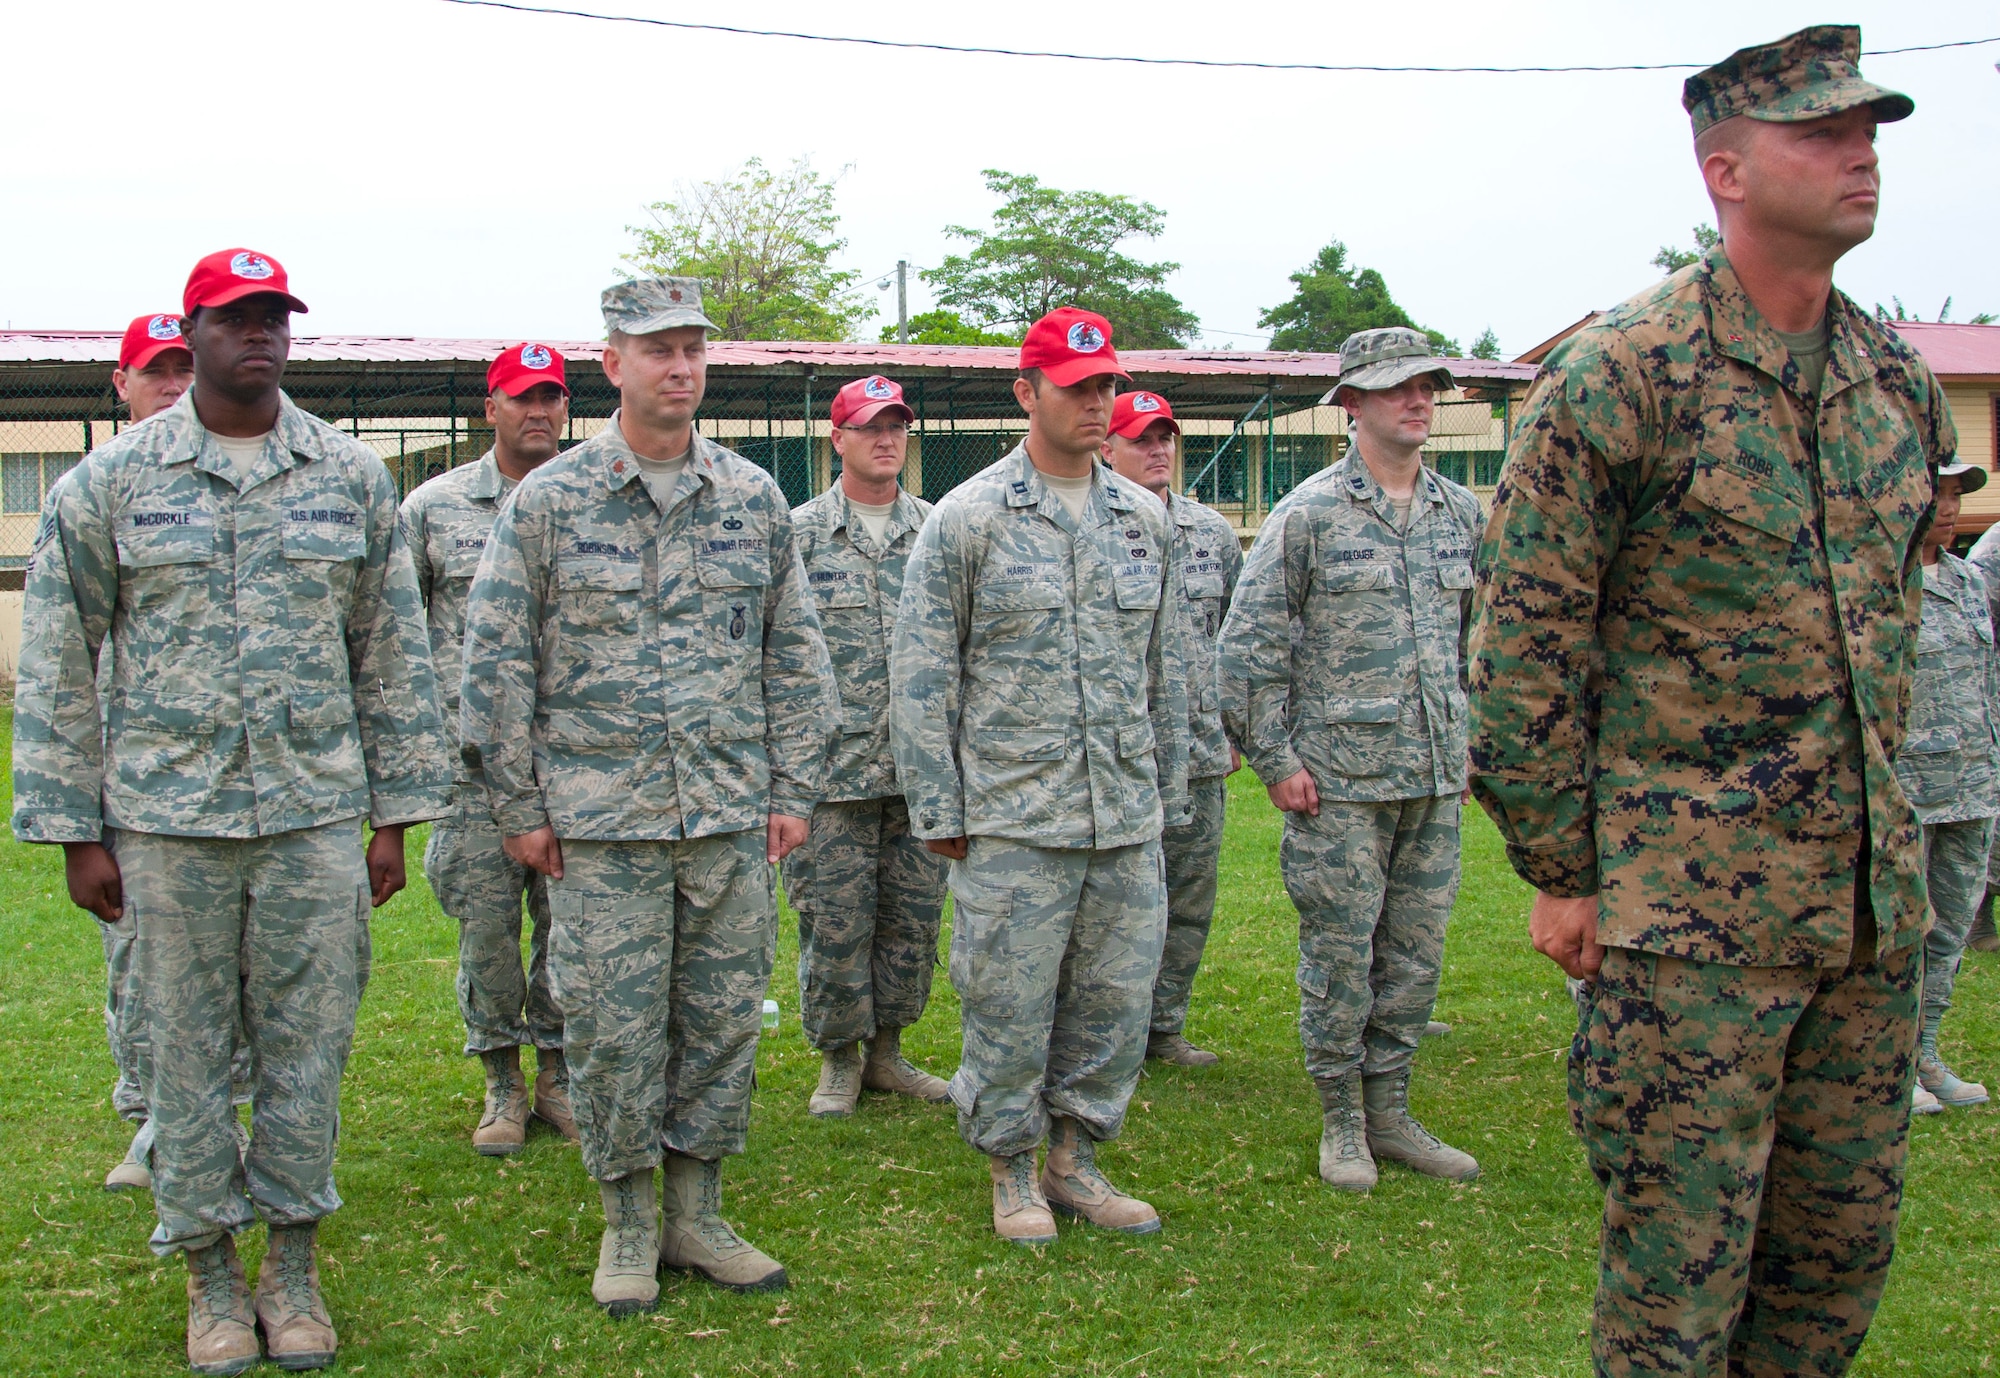 U.S. Marine Corps Chief Warrant Officer Patrick Robb, officer in charge of New Horizons Marine Corps engineers, right, leads a formation during a ribbon cutting ceremony June 4, 2014, at the school in Belize City, Belize. Marines from various Marine Wing Support Squadrons under the 4th Marine Aircraft Wing worked with engineers from the Belize Defence Force, U.S. Air Force and U.S. Army for nearly 40 working days to build the school's 1,372 square foot, two-classroom. New Horizons is an annual multinational exercise that provides training opportunities in civil engineering and medical care. (U.S. Air Force photo by Tech. Sgt. Kali L. Gradishar/Released)